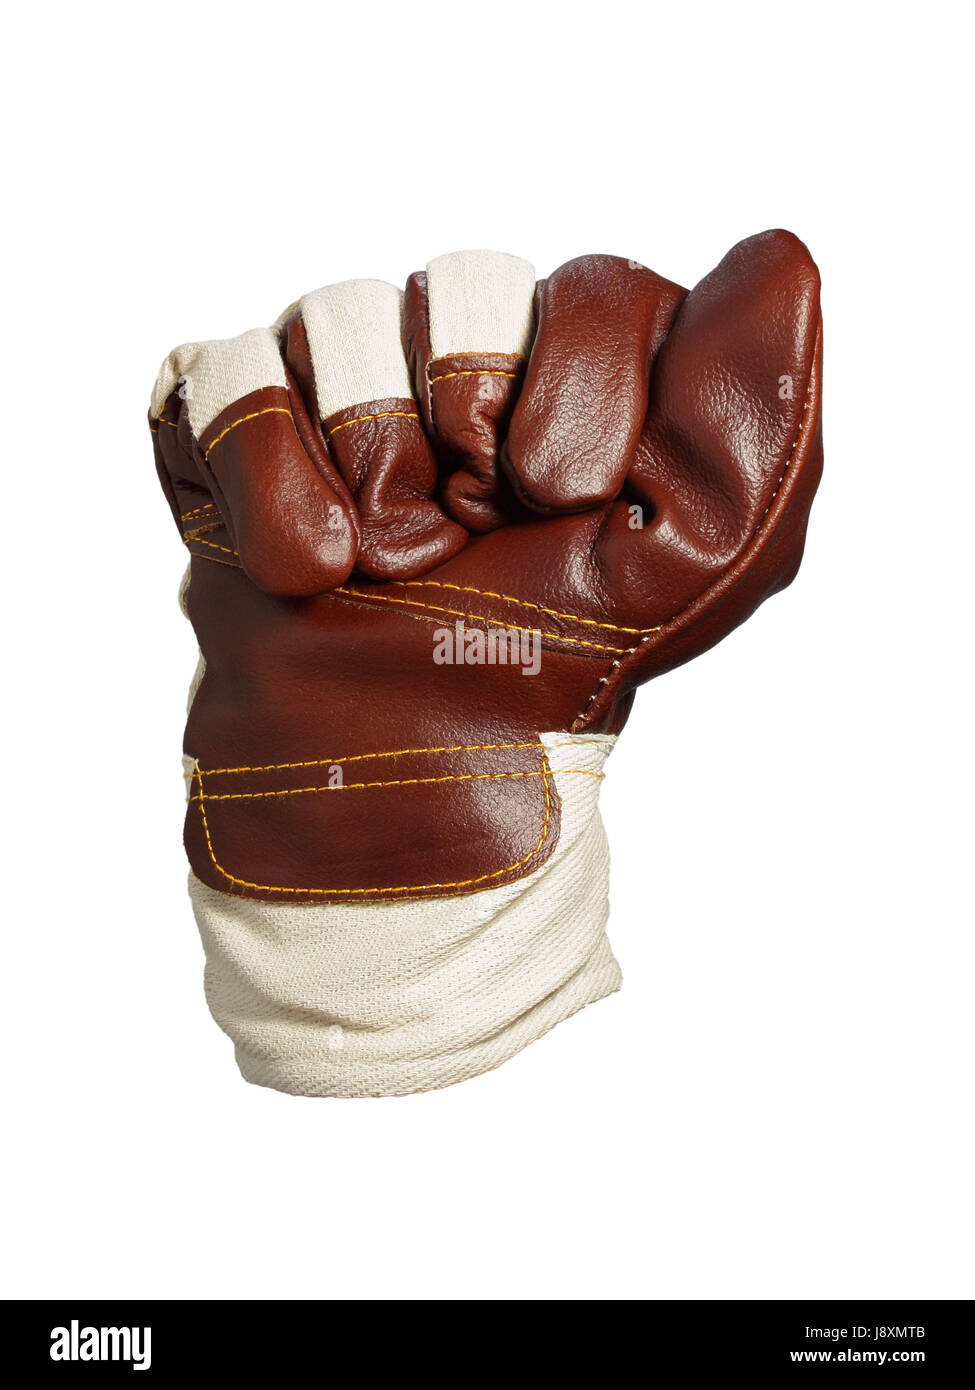 sign, signal, dismissal, leather, fist, glove, threat, crisis, protect, Stock Photo